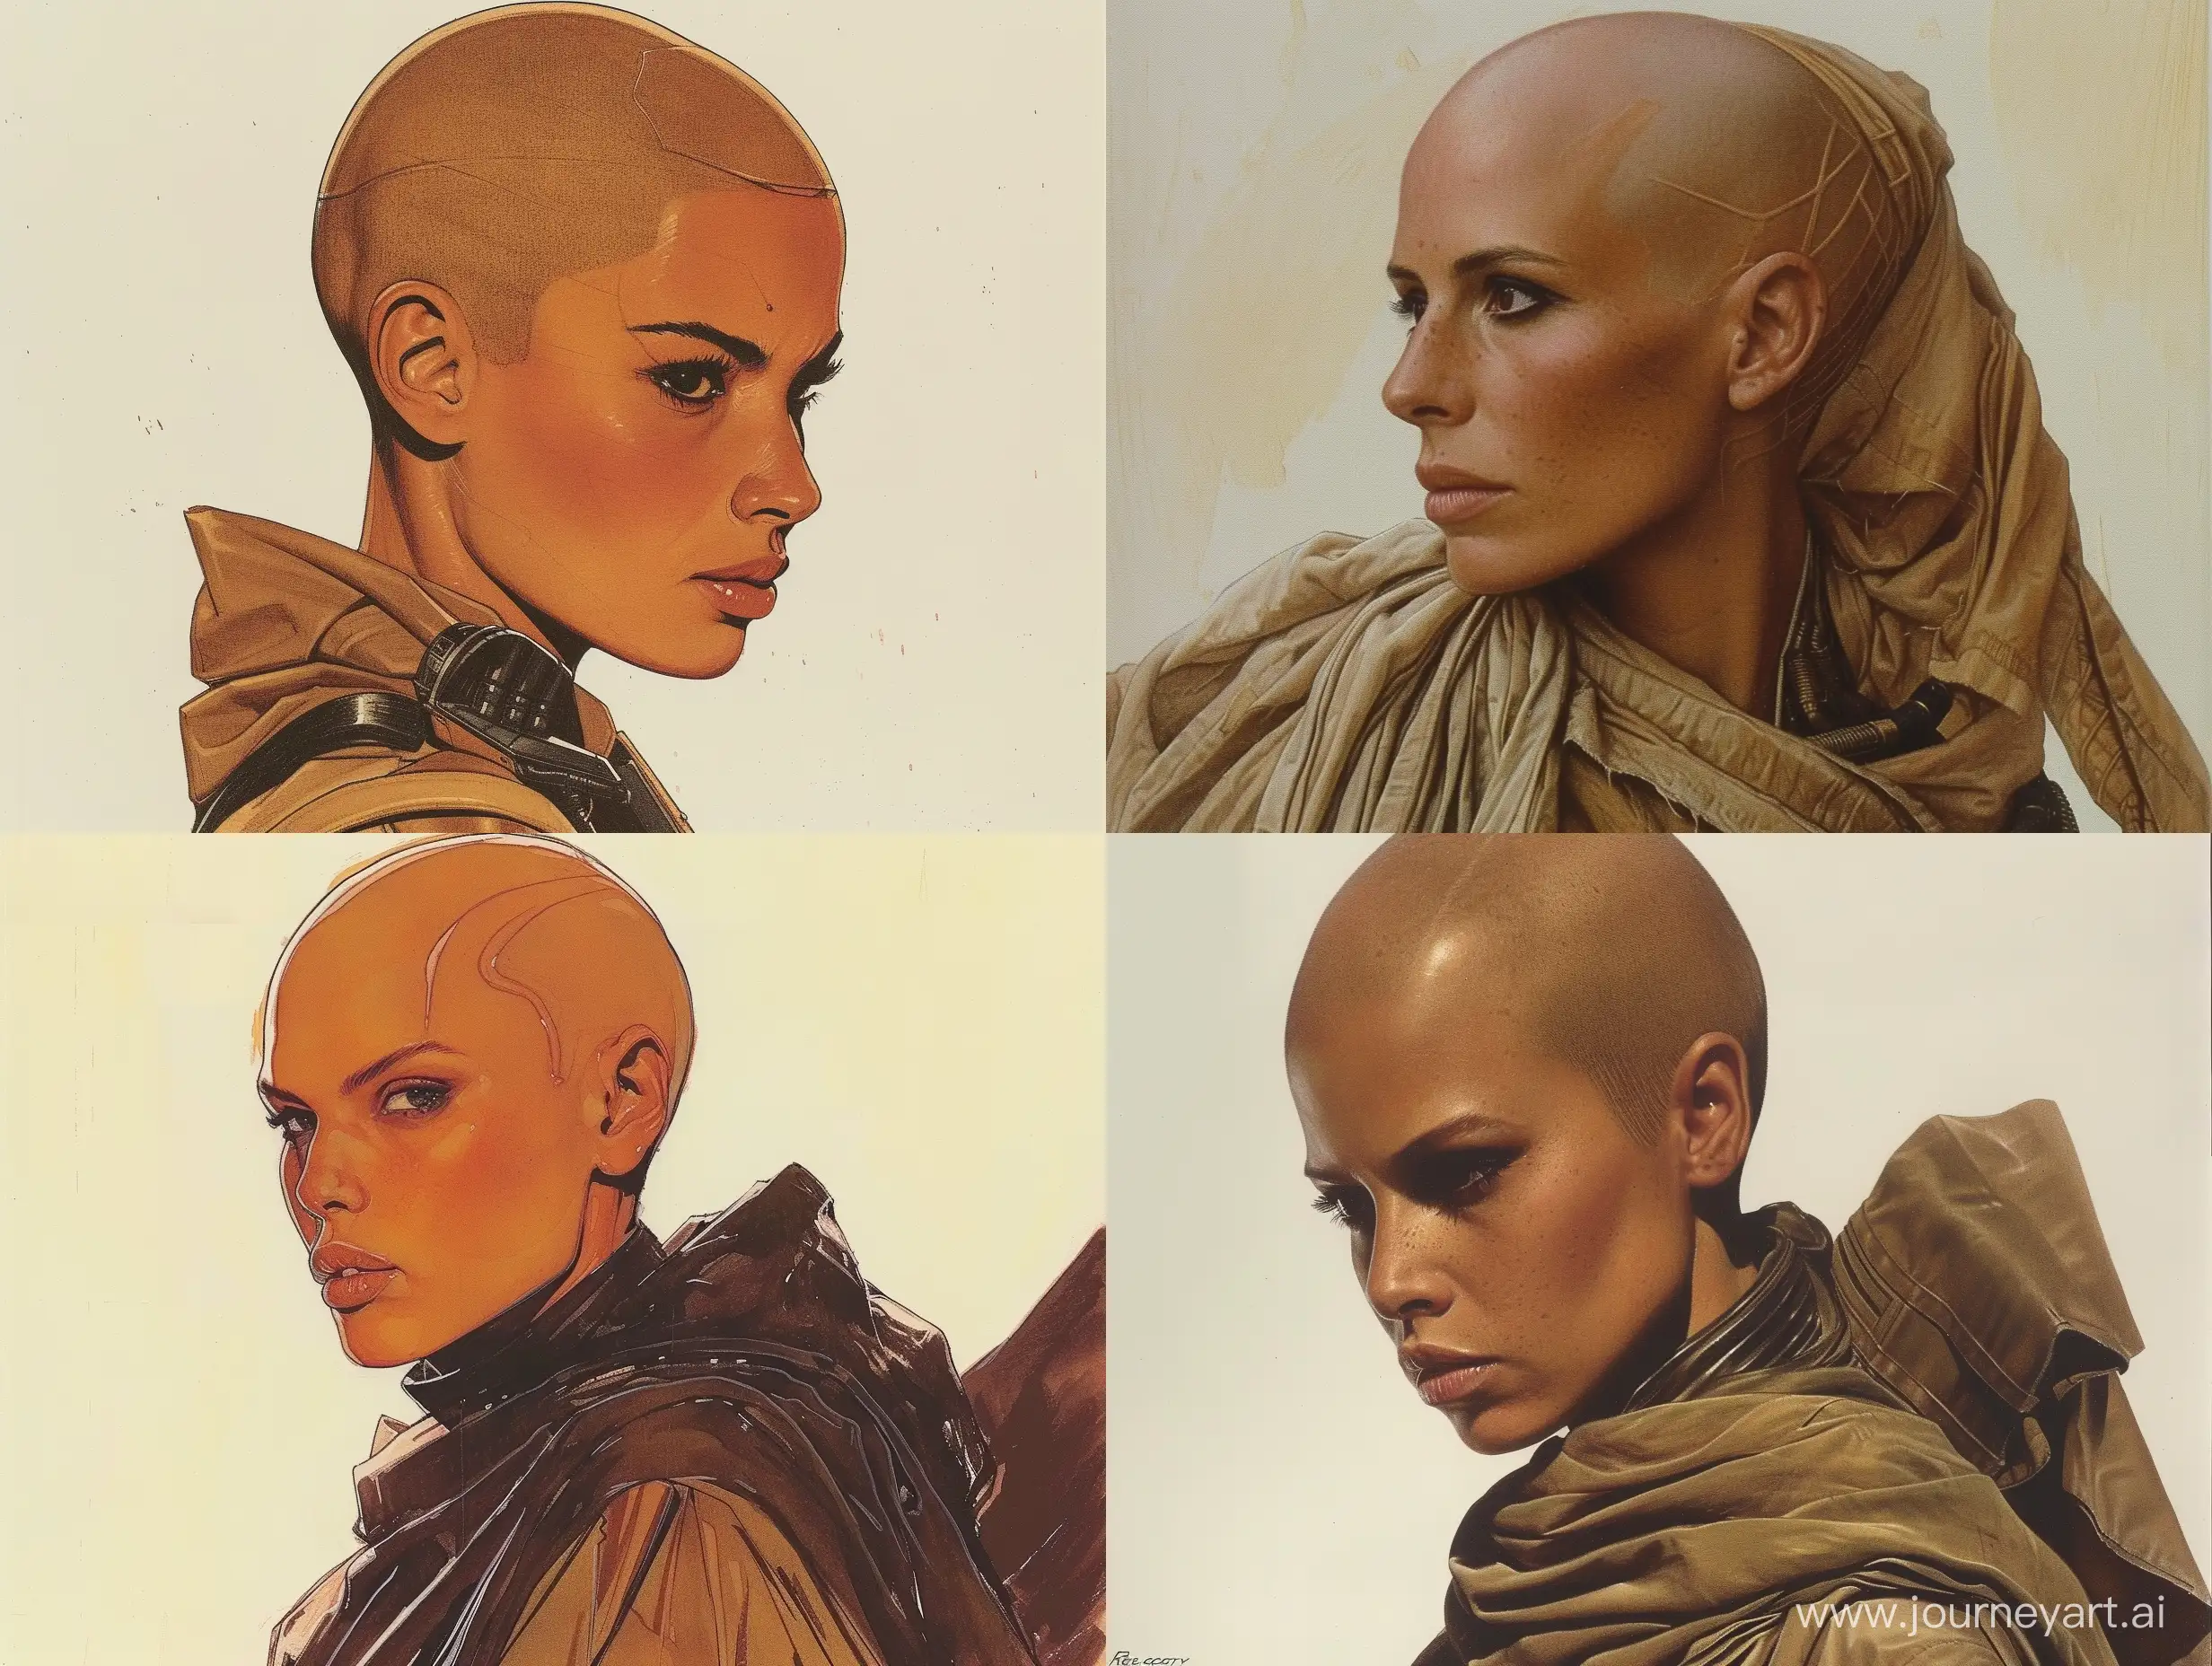 Concept art of a bald Bene Gesserit woman from Jodorowsky's Dune by Ralph McQuarrie. Dune. Retro Science Fiction Art style. in color.
